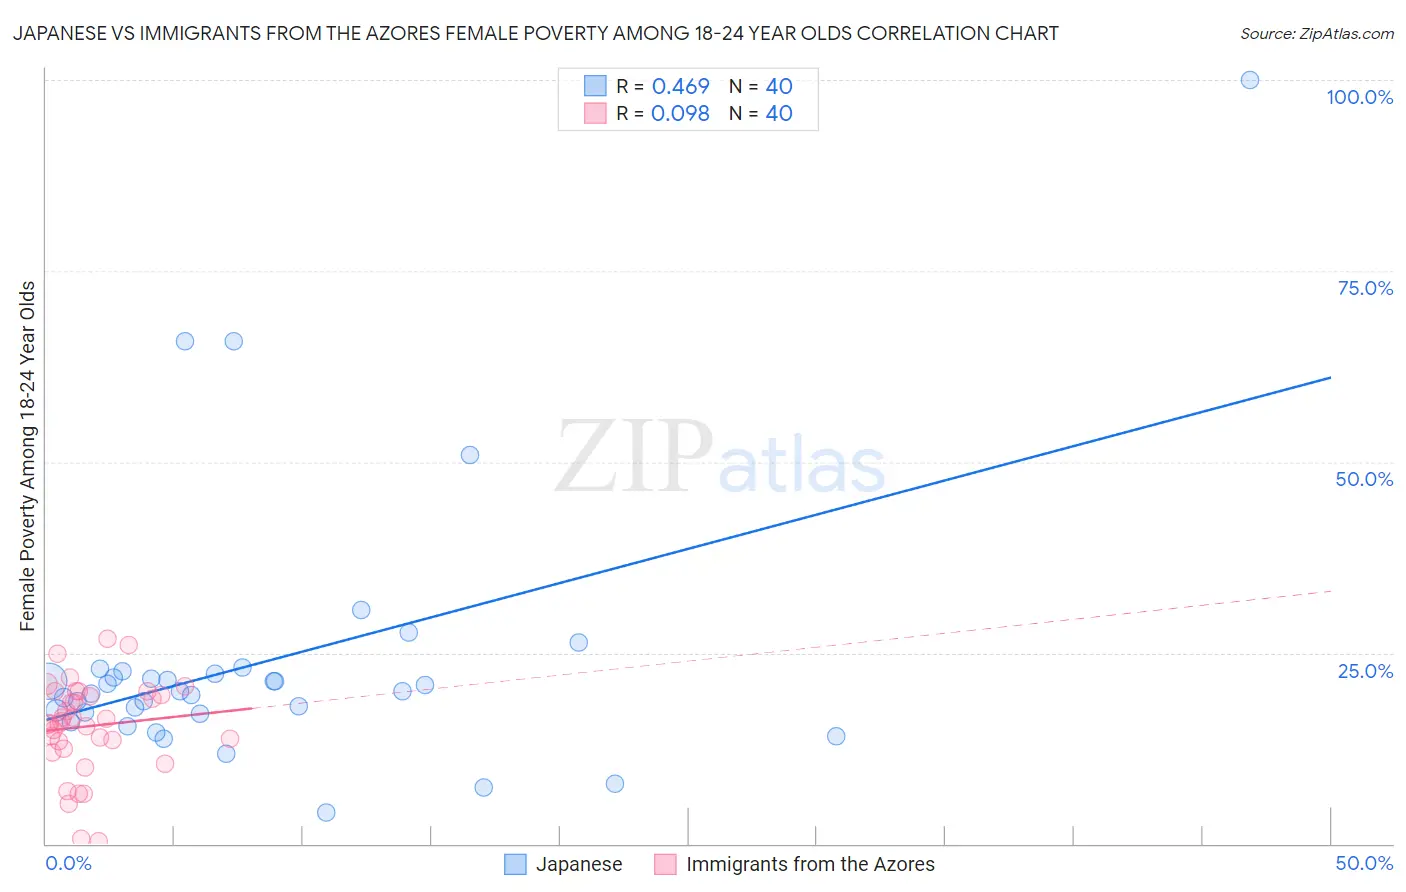 Japanese vs Immigrants from the Azores Female Poverty Among 18-24 Year Olds